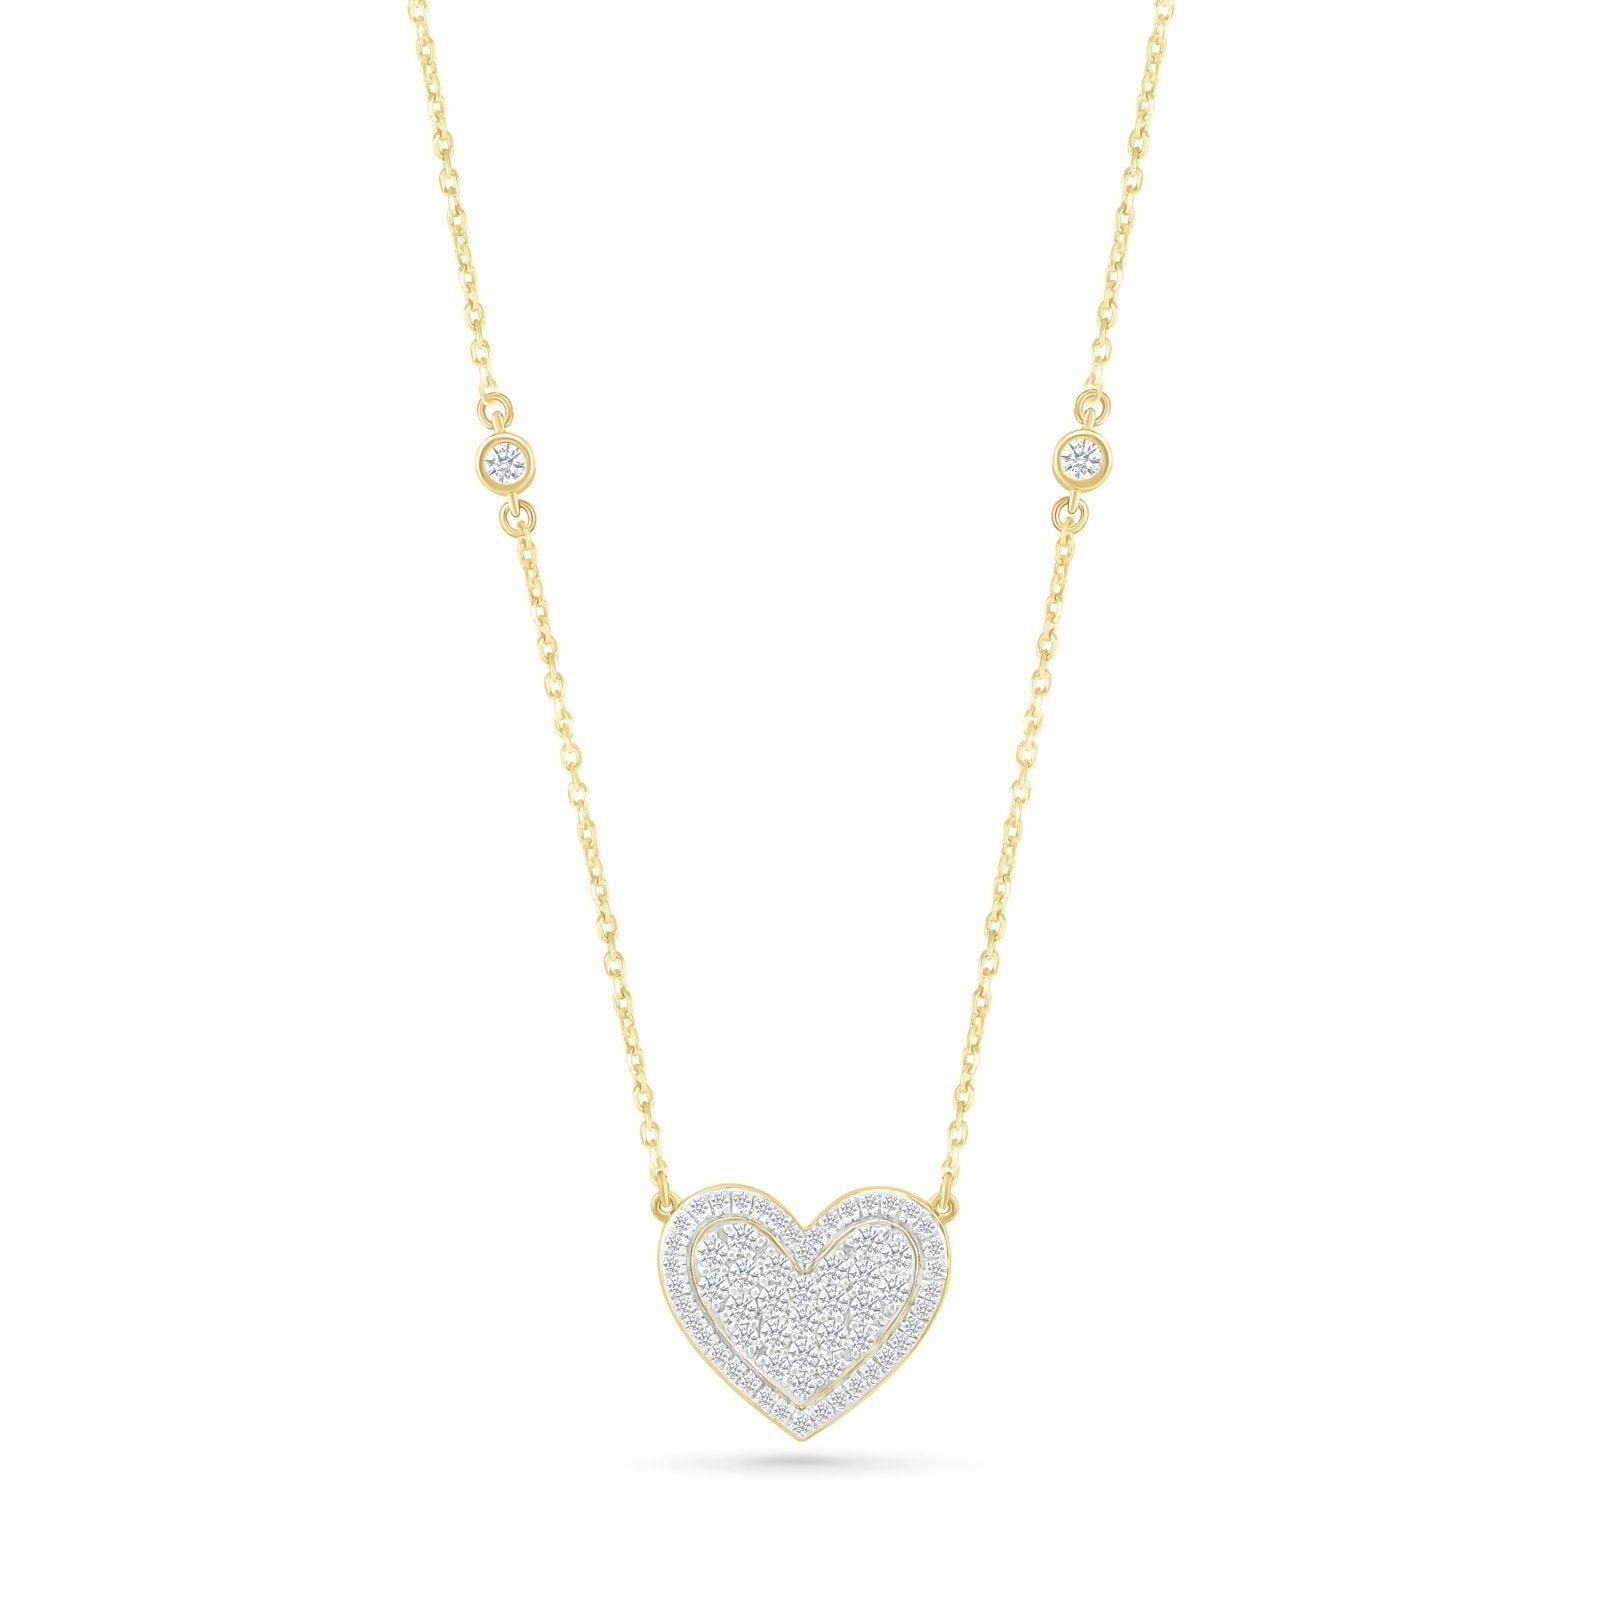 Diamond Pave Heart Necklace Necklaces Estella Collection 32699 Diamond Made to Order Yellow Gold #tag4# #tag5# #tag6# #tag7# #tag8# #tag9# #tag10#